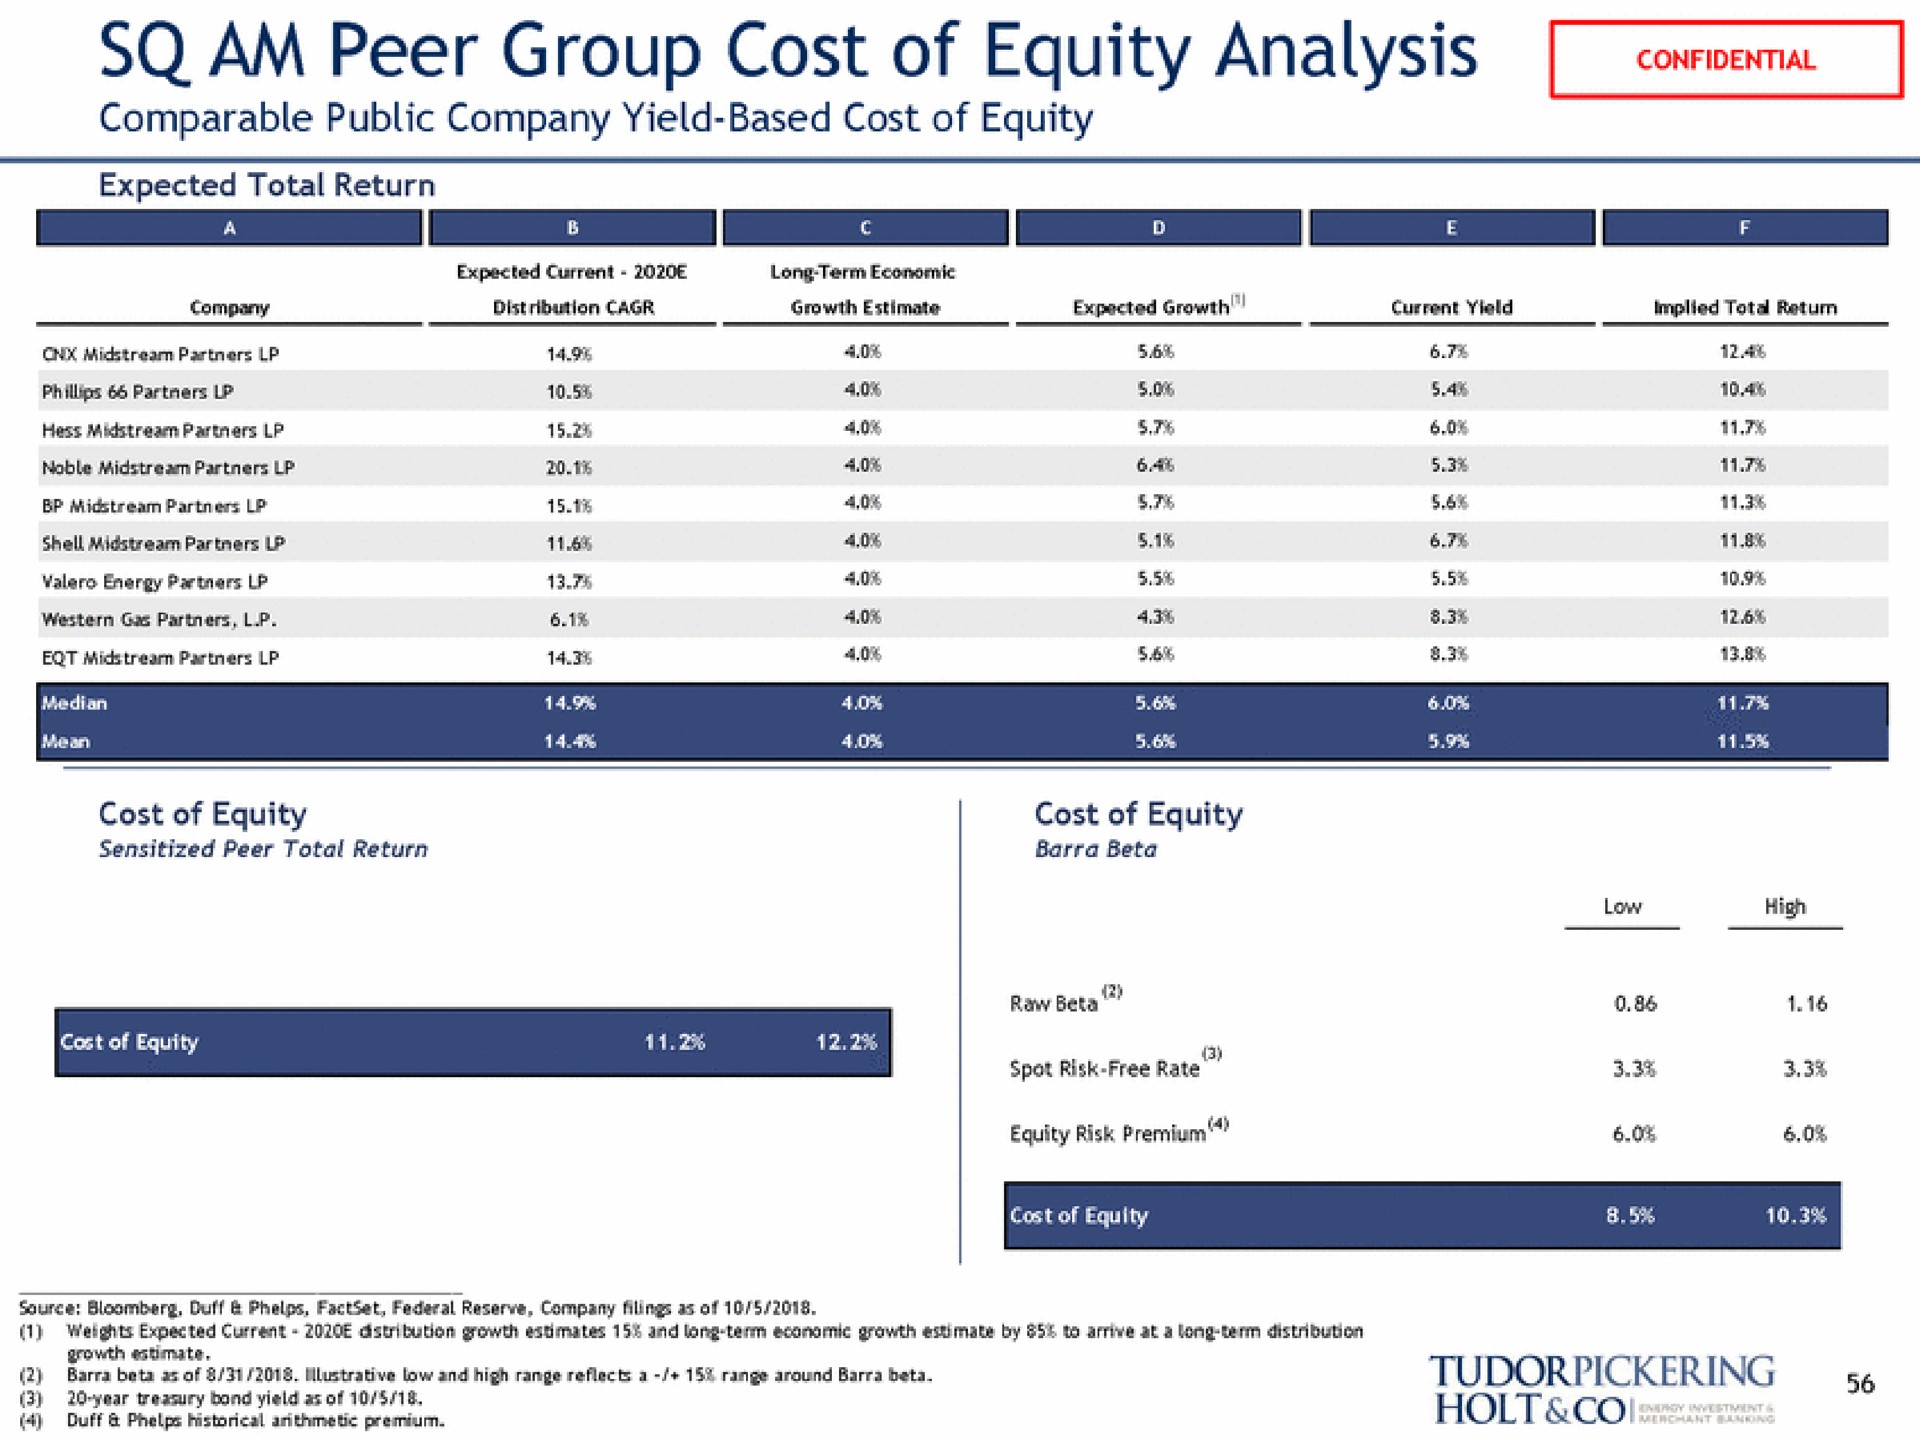 am peer group cost of equity analysis comparable public company yield based cost of equity i | Tudor, Pickering, Holt & Co